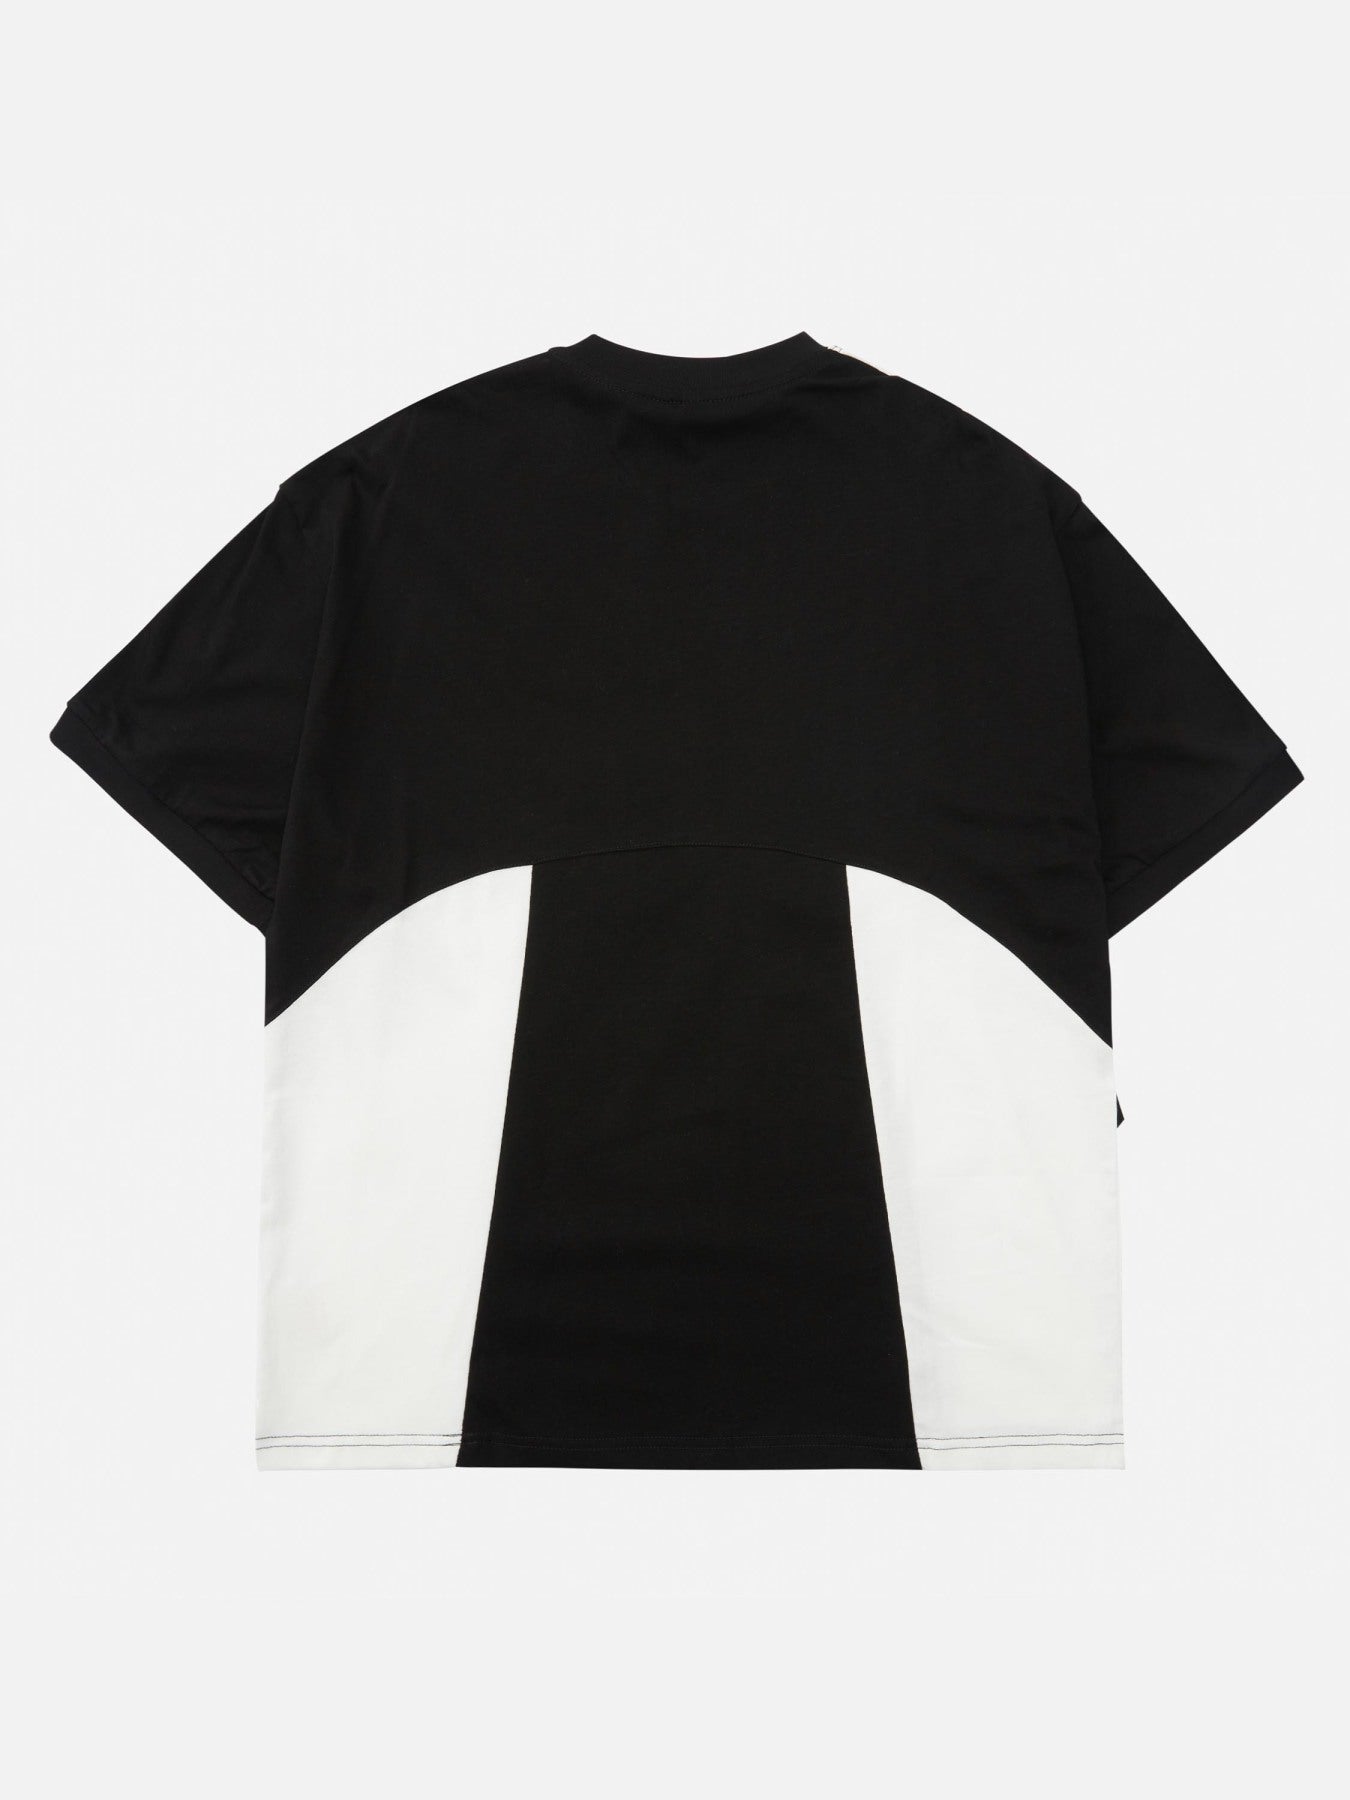 The Supermade Embroidered Panel T-shirt